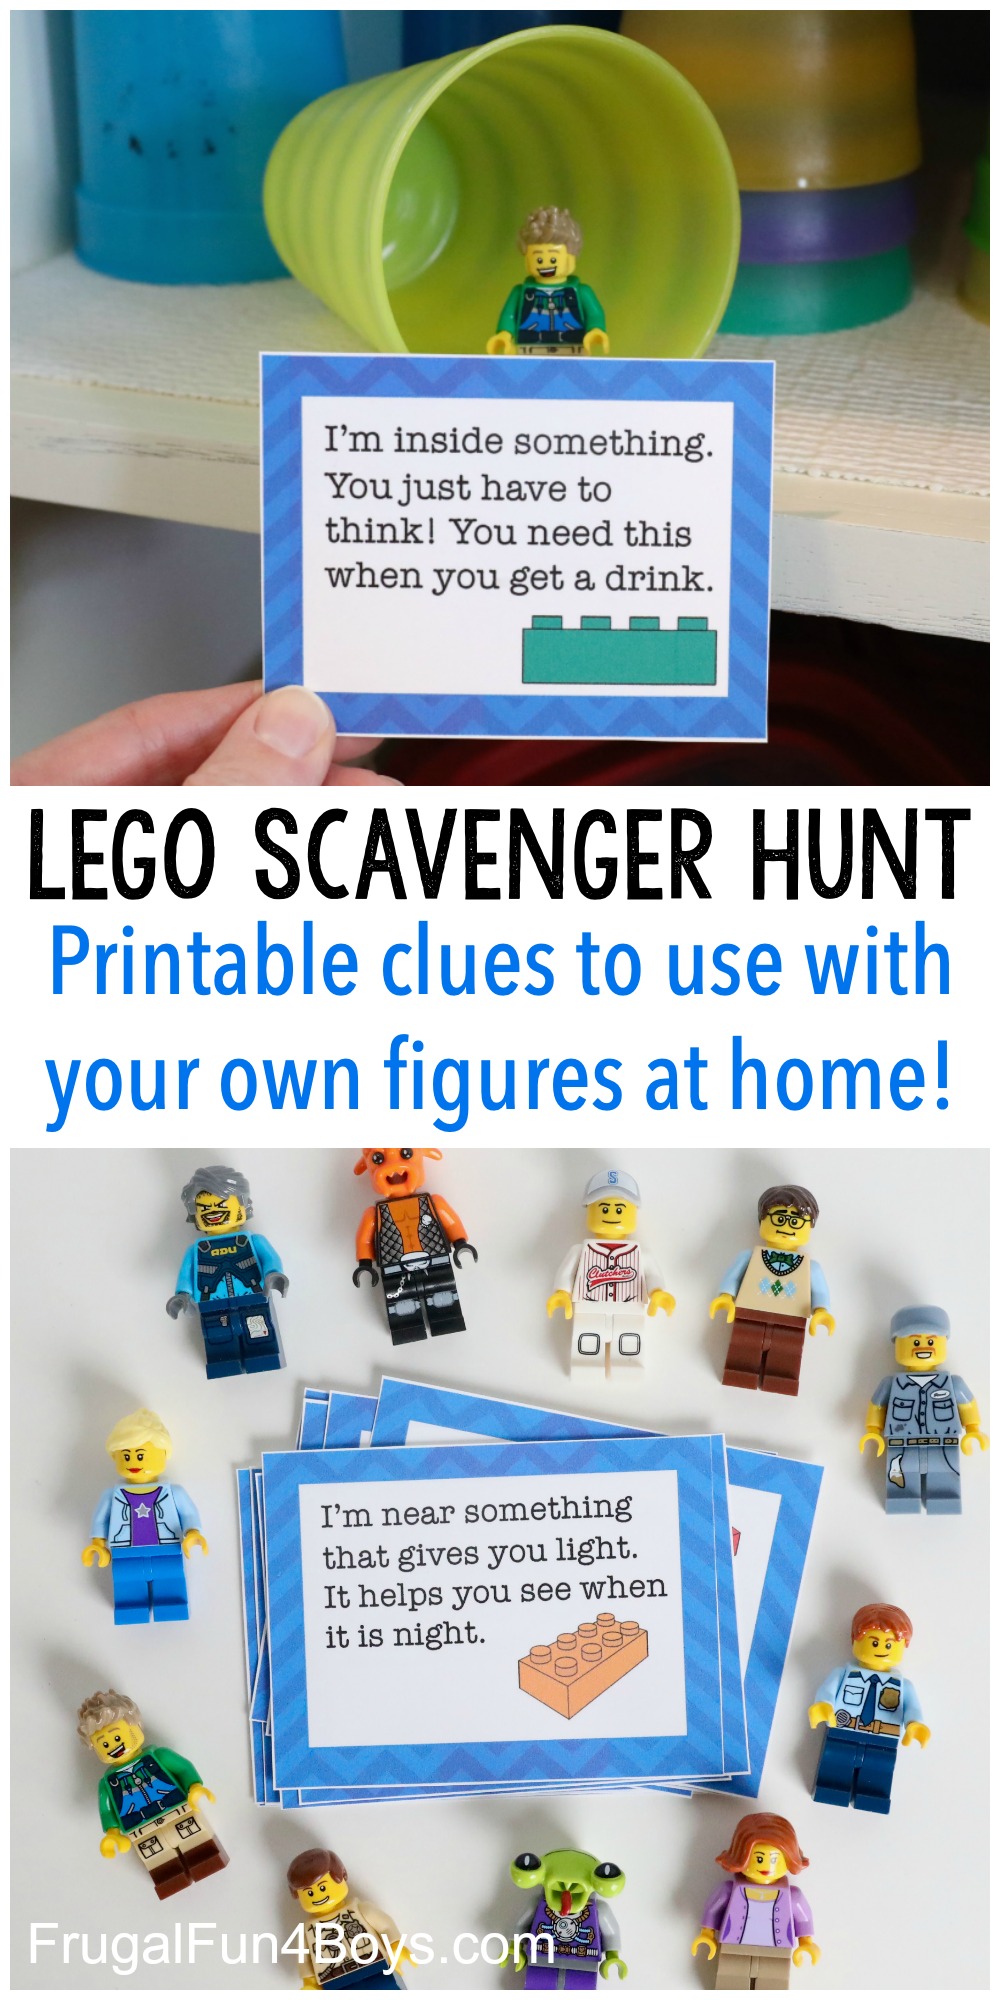 Lego Scavenger Hunt with printable clue cards